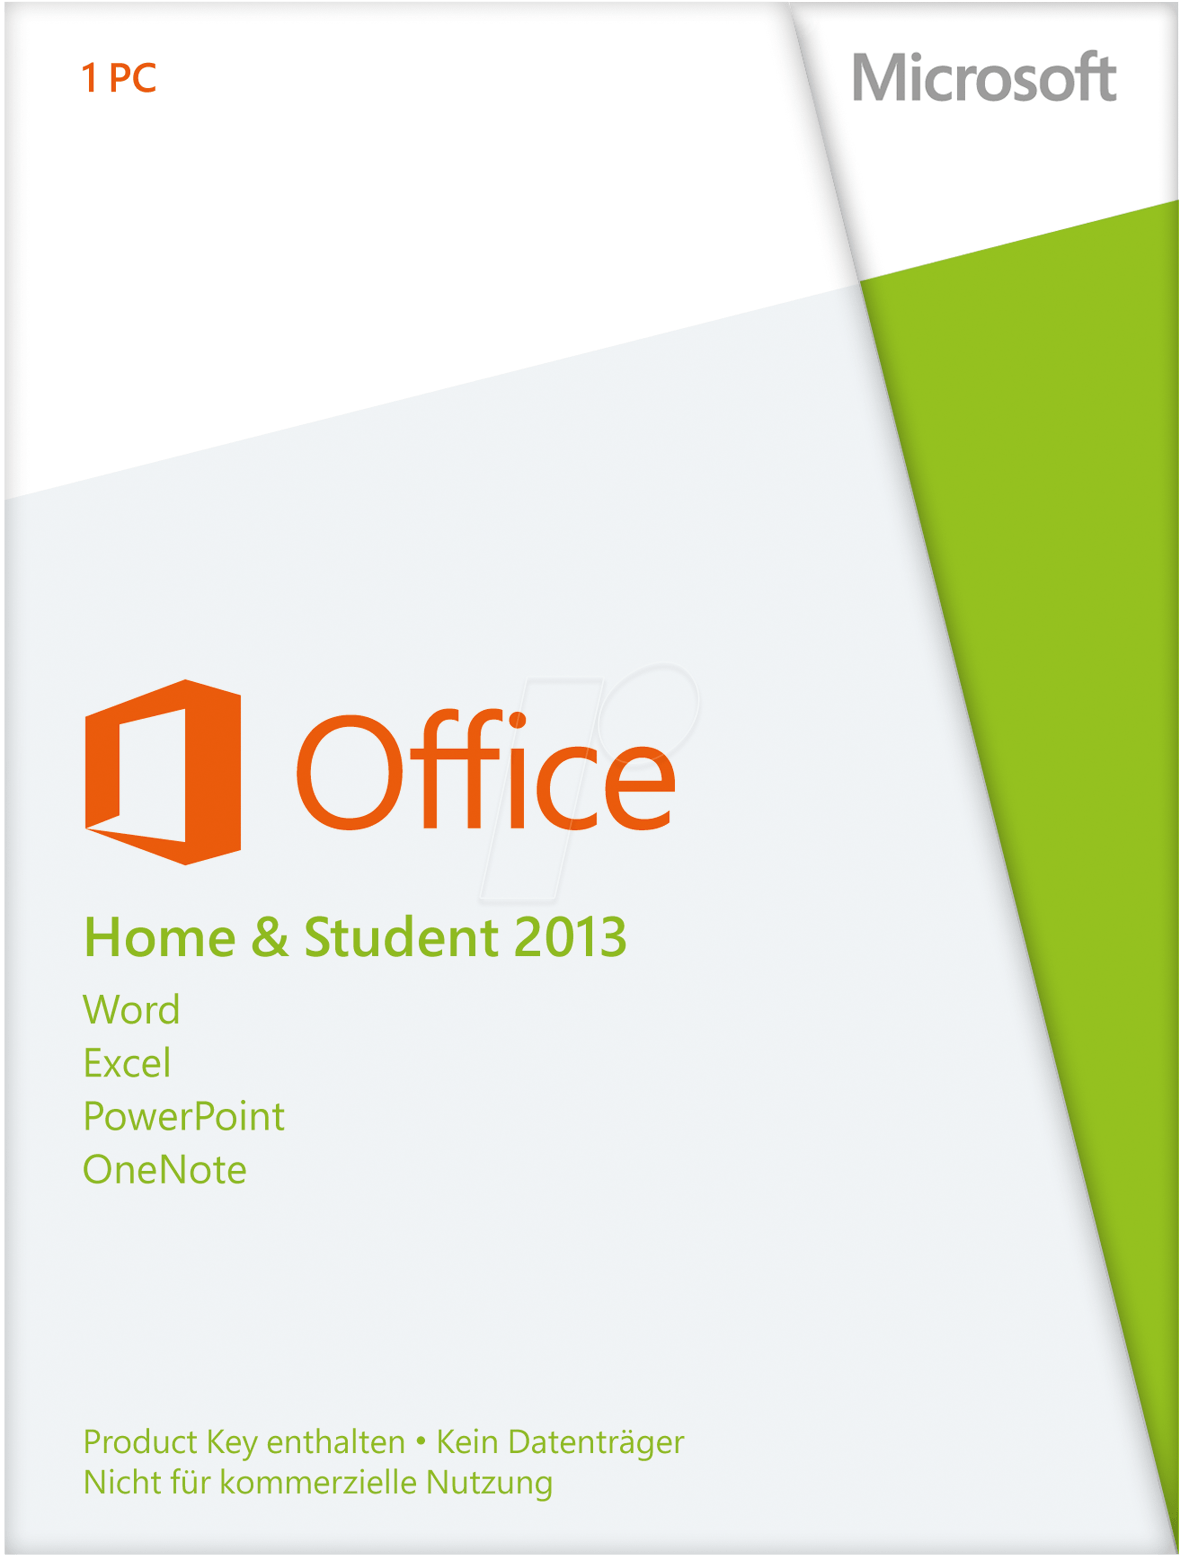 ms office for students for free